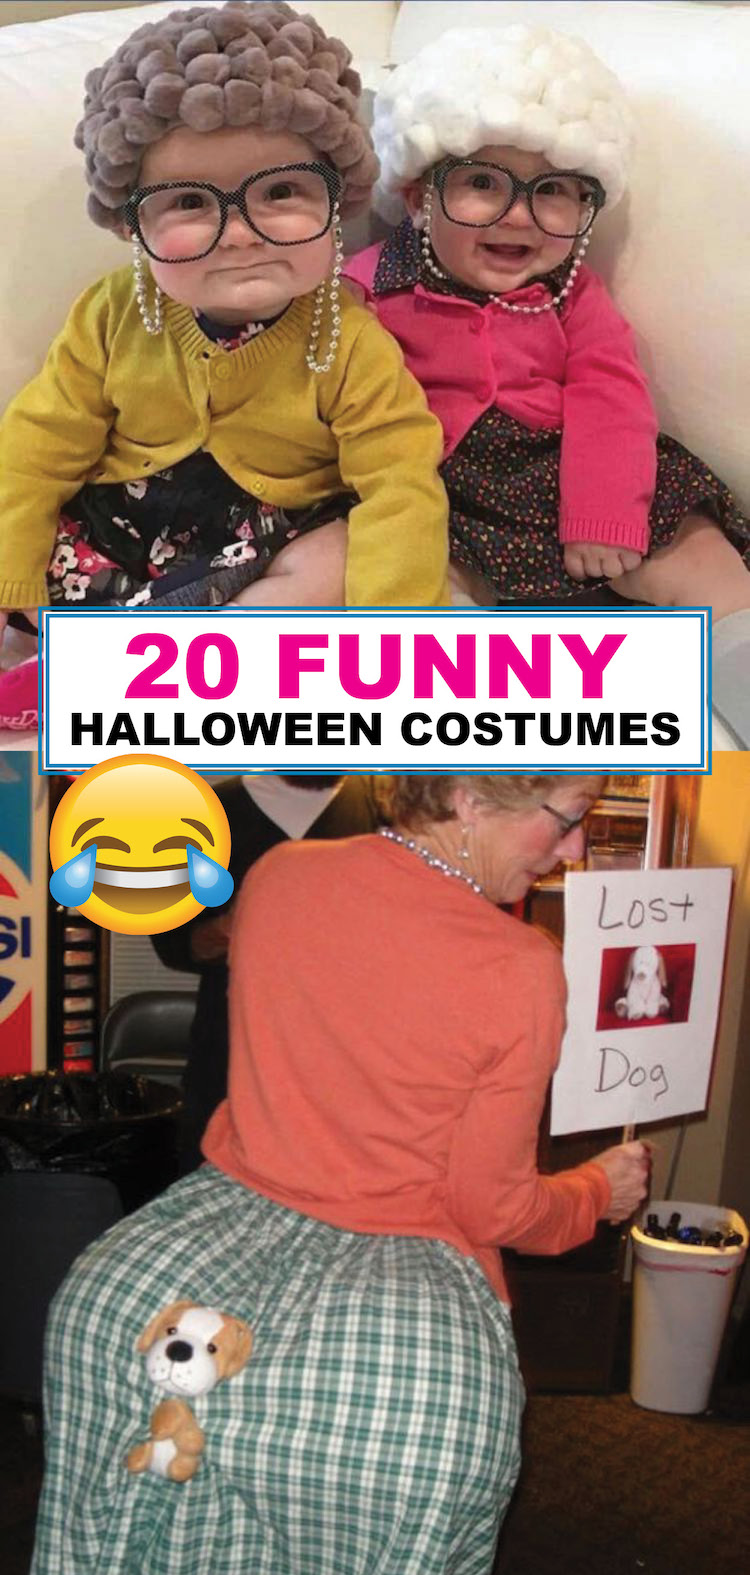 20 Funny Halloween Costumes That Everyone Loves